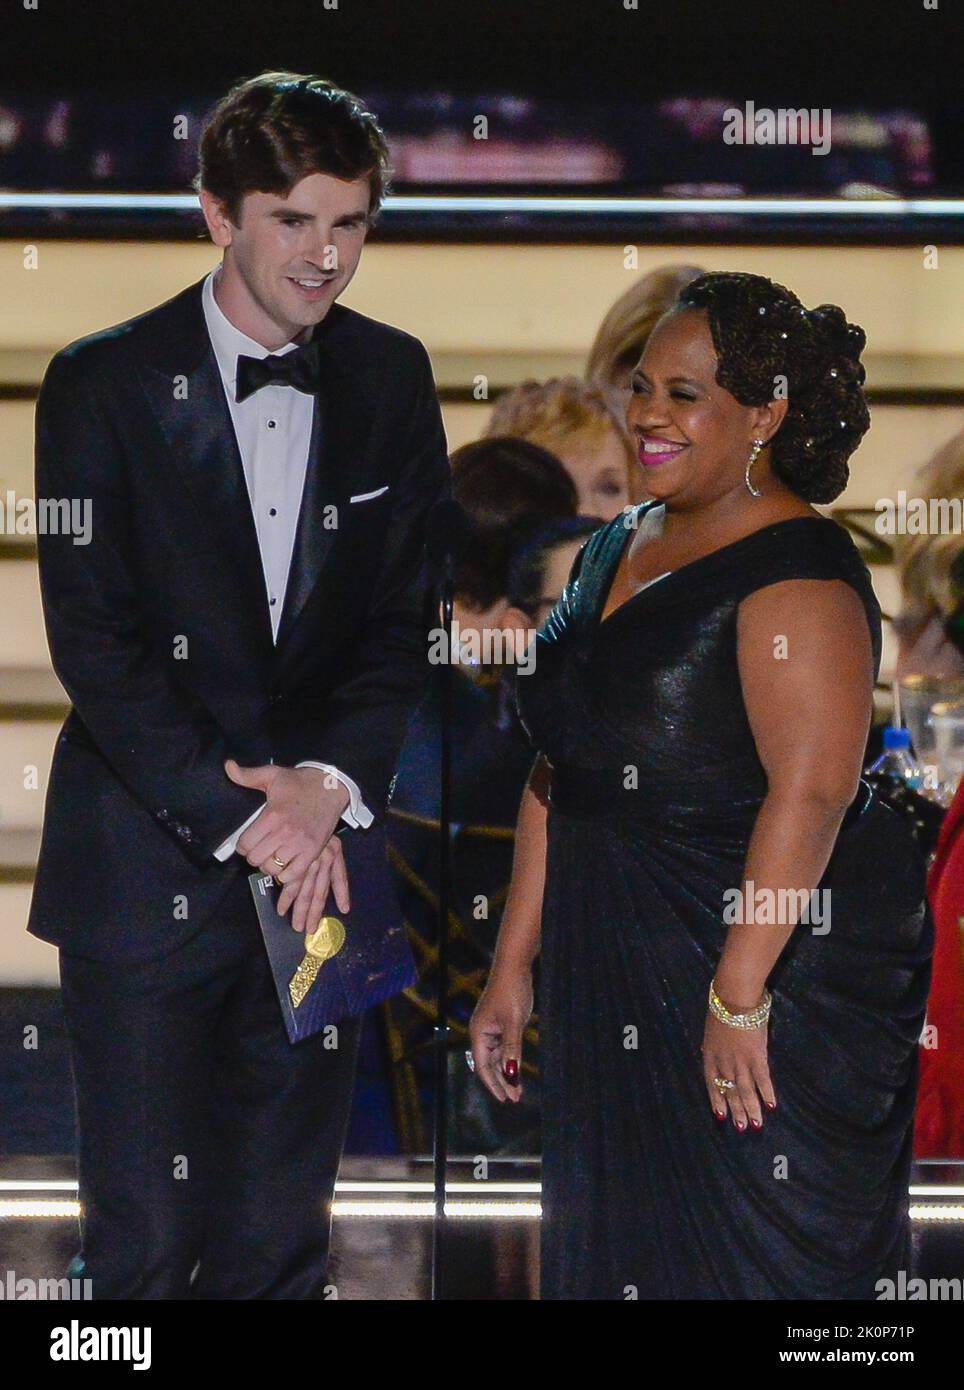 Los Angeles, United States. 12th Sep, 2022. (L-R) Freddie Highmore and Chandra Wilson speak onstage during the 74th annual Primetime Emmy Awards at the Microsoft Theater in Los Angeles on Monday, September 12, 2022. Photo by Mike Goulding/UPI Credit: UPI/Alamy Live News Credit: UPI/Alamy Live News Credit: UPI/Alamy Live News Stock Photo